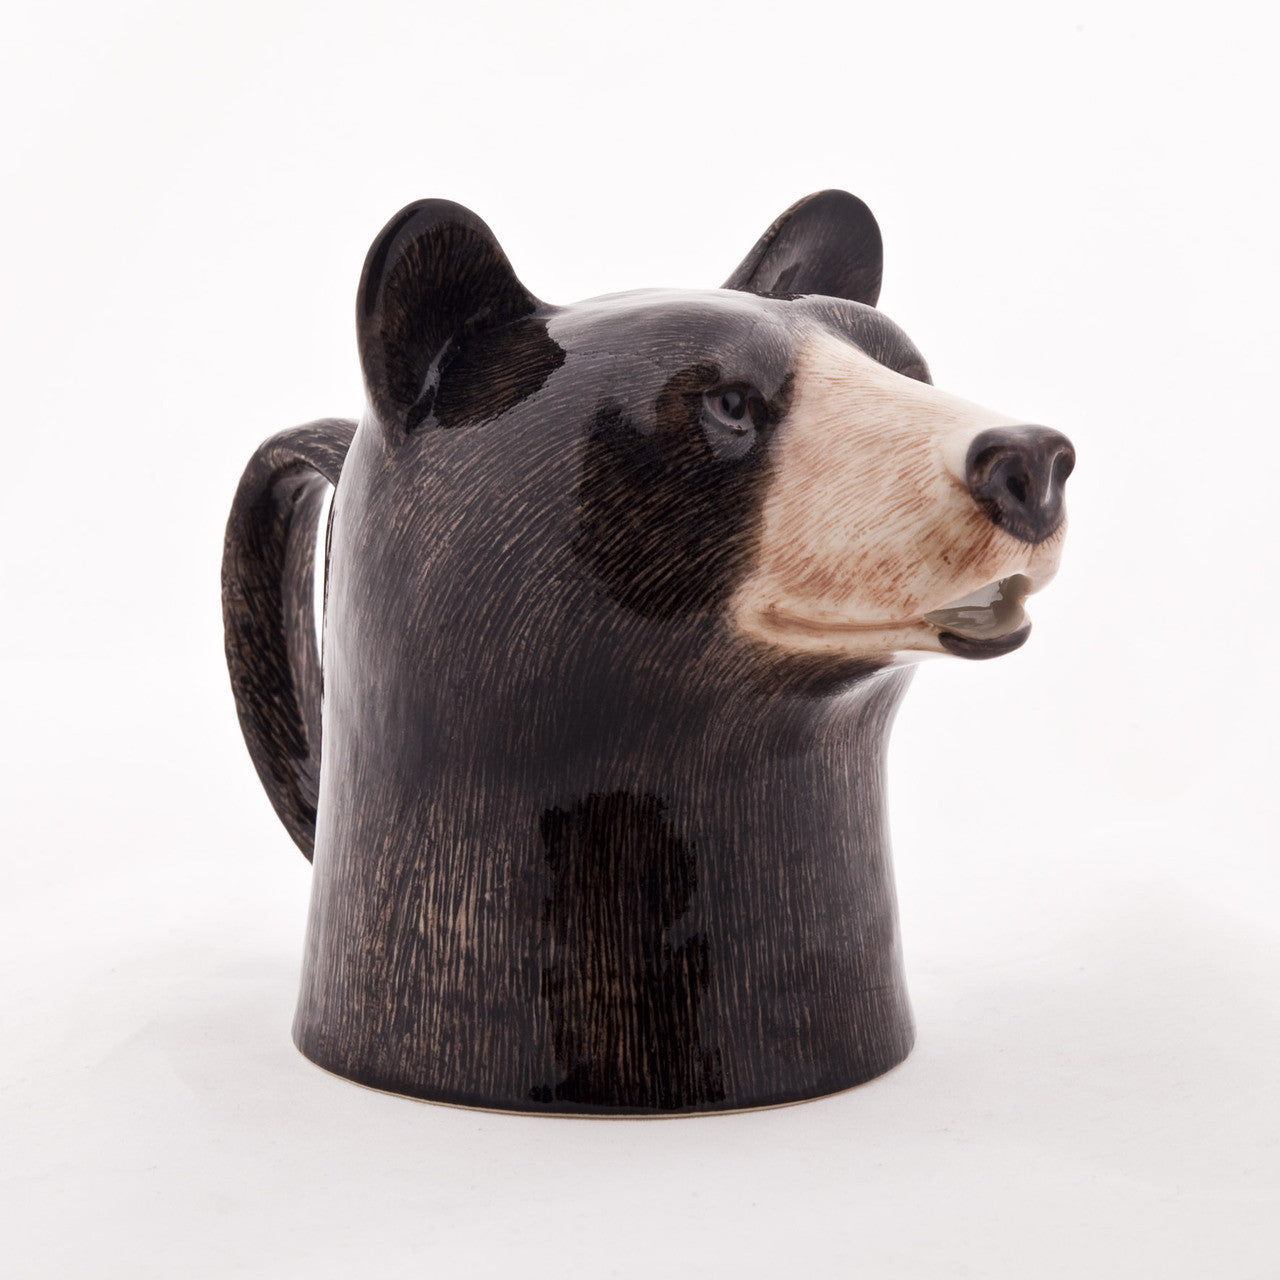 A traditional British design mug featuring a black bear from the renowned British brand, Quail Ceramics, displayed on a pure white background has been replaced with:

Woodland Animal Jugs from the renowned British brand, Quail, are traditional British design mugs featuring a black bear displayed on a pure white background.